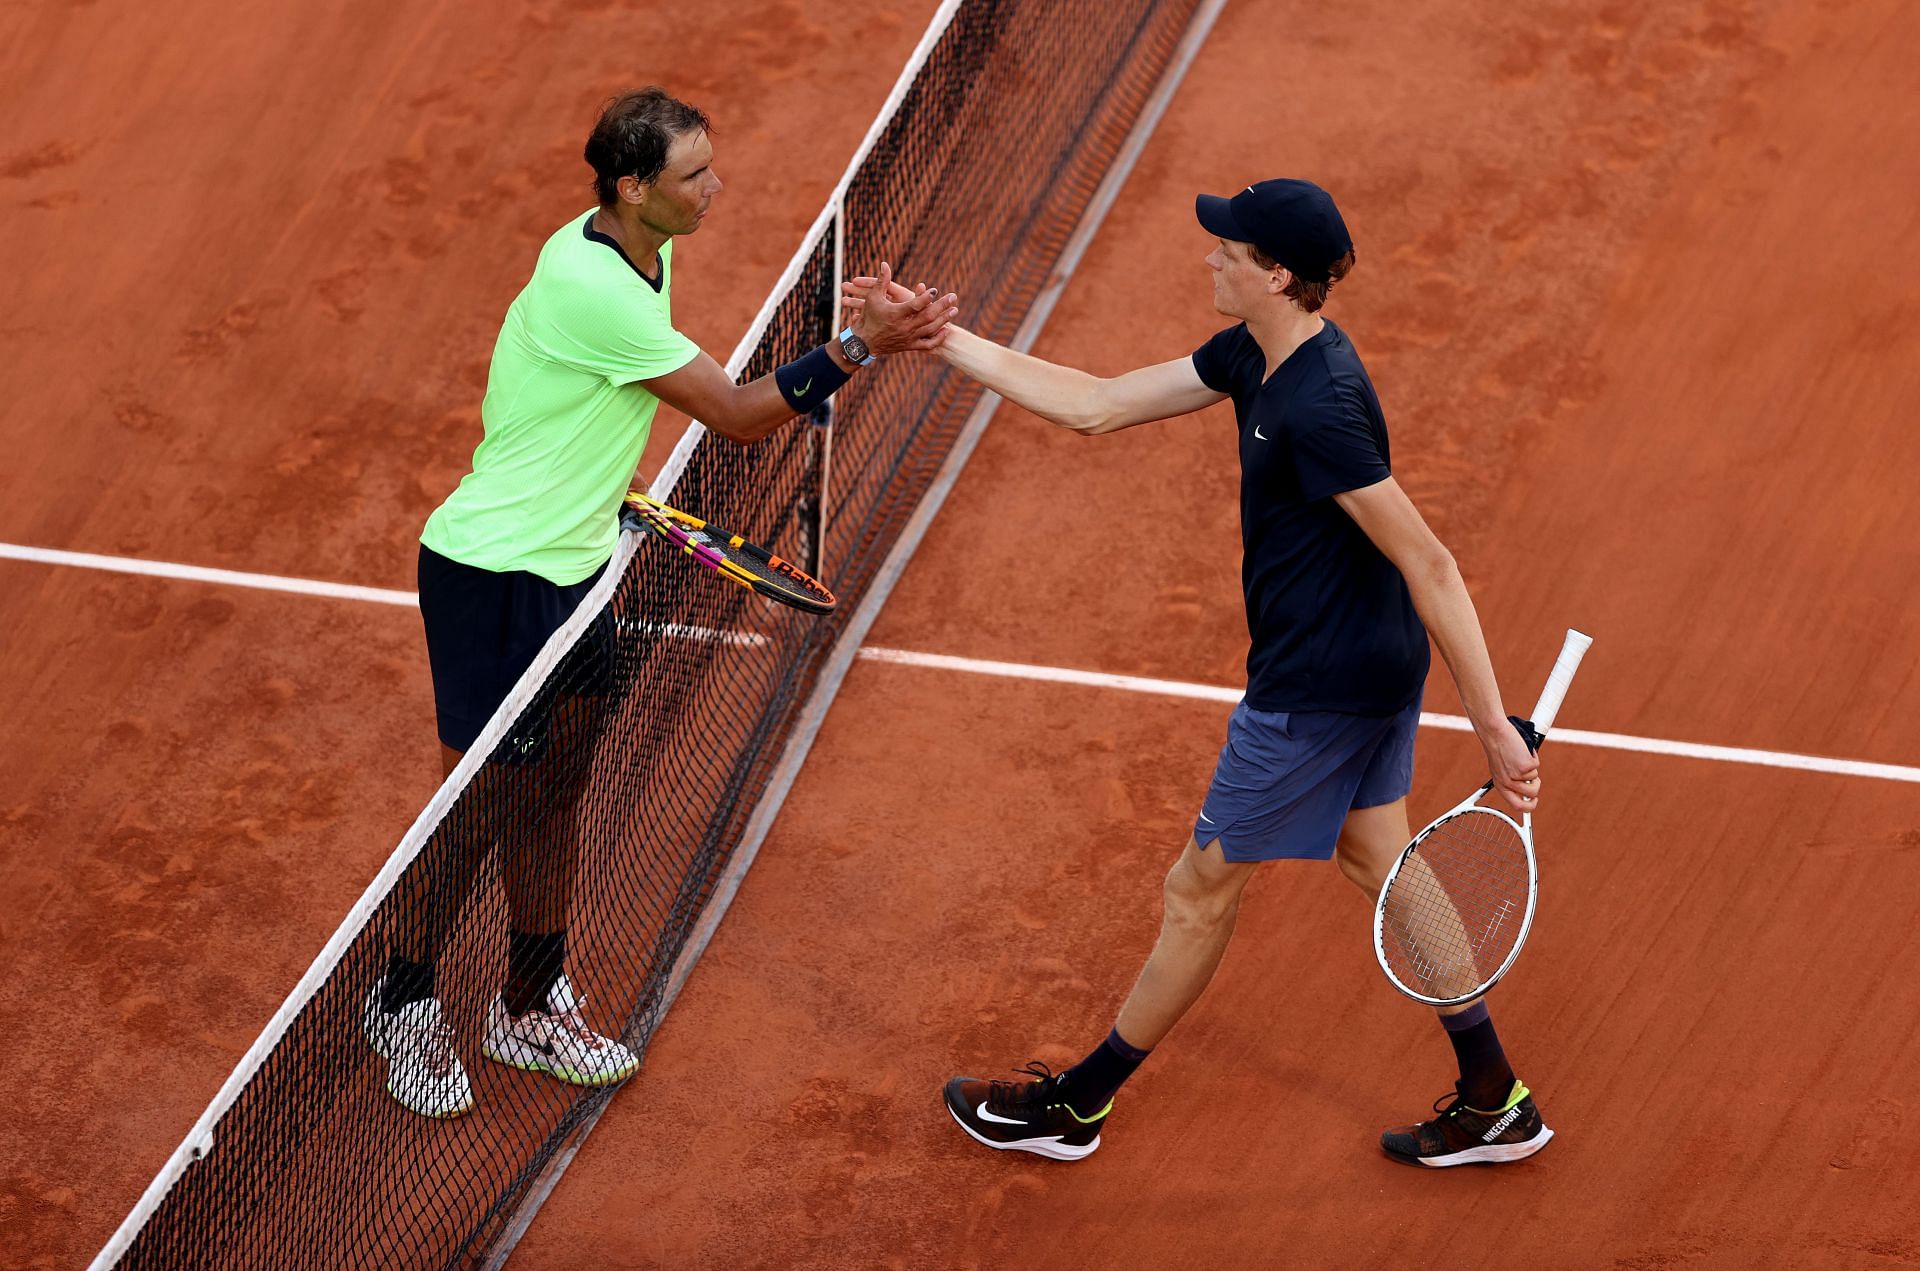 Rafael Nadal and Jannik Sinner shake hands after their match at the 2021 French Open